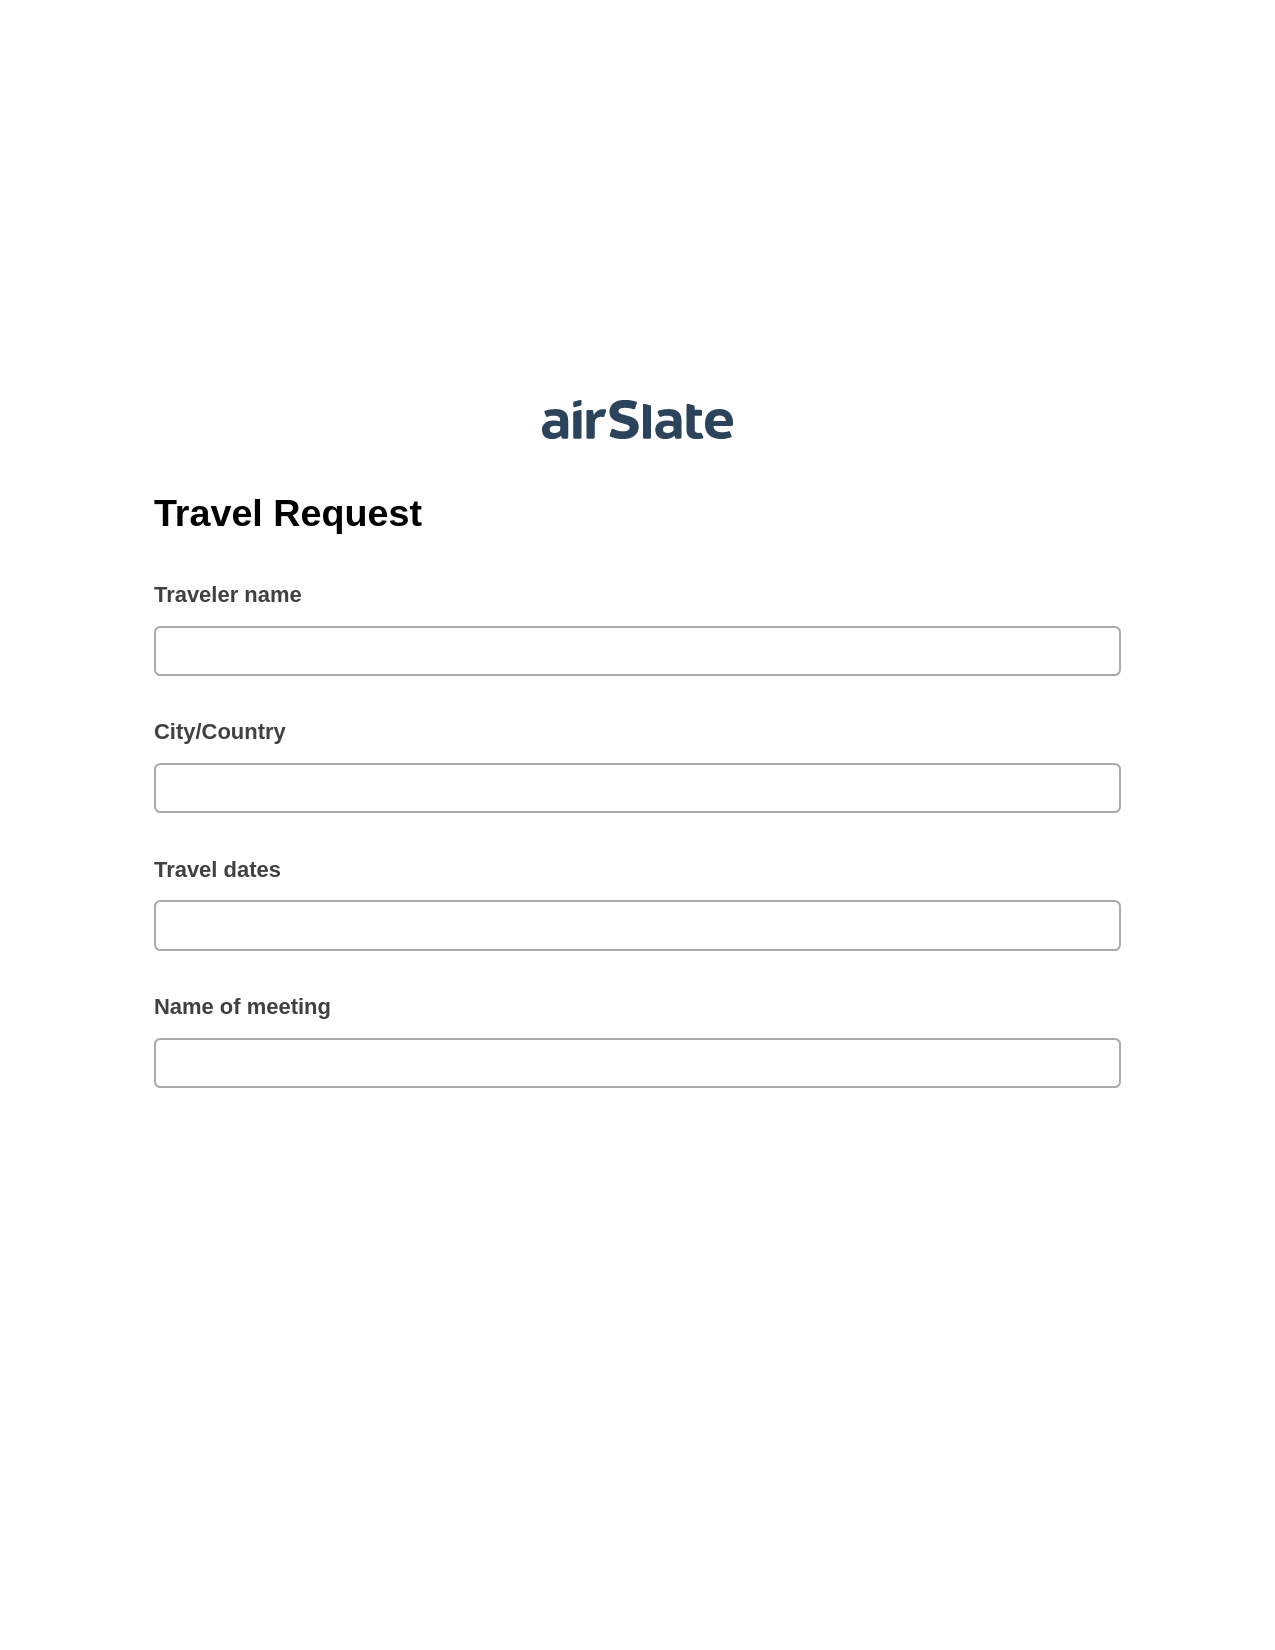 Travel Request Pre-fill Dropdown from Airtable, Create slate addon, Export to Formstack Documents Bot